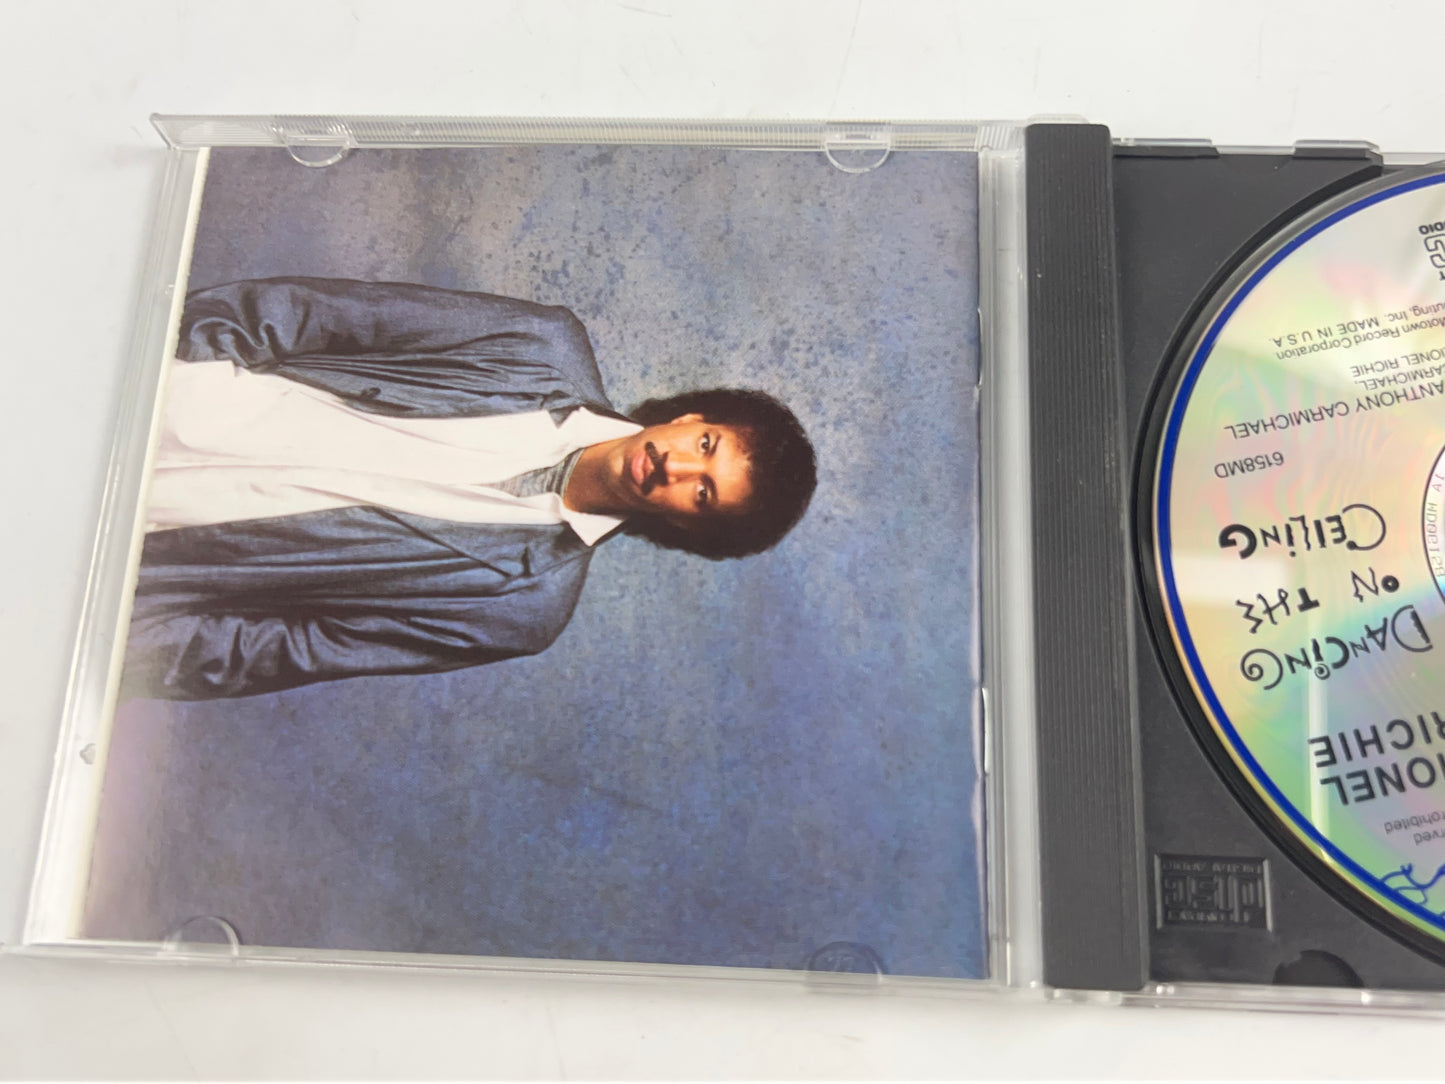 Dancing on the Ceiling by Lionel Richie (CD, Mar-1992, Motown)